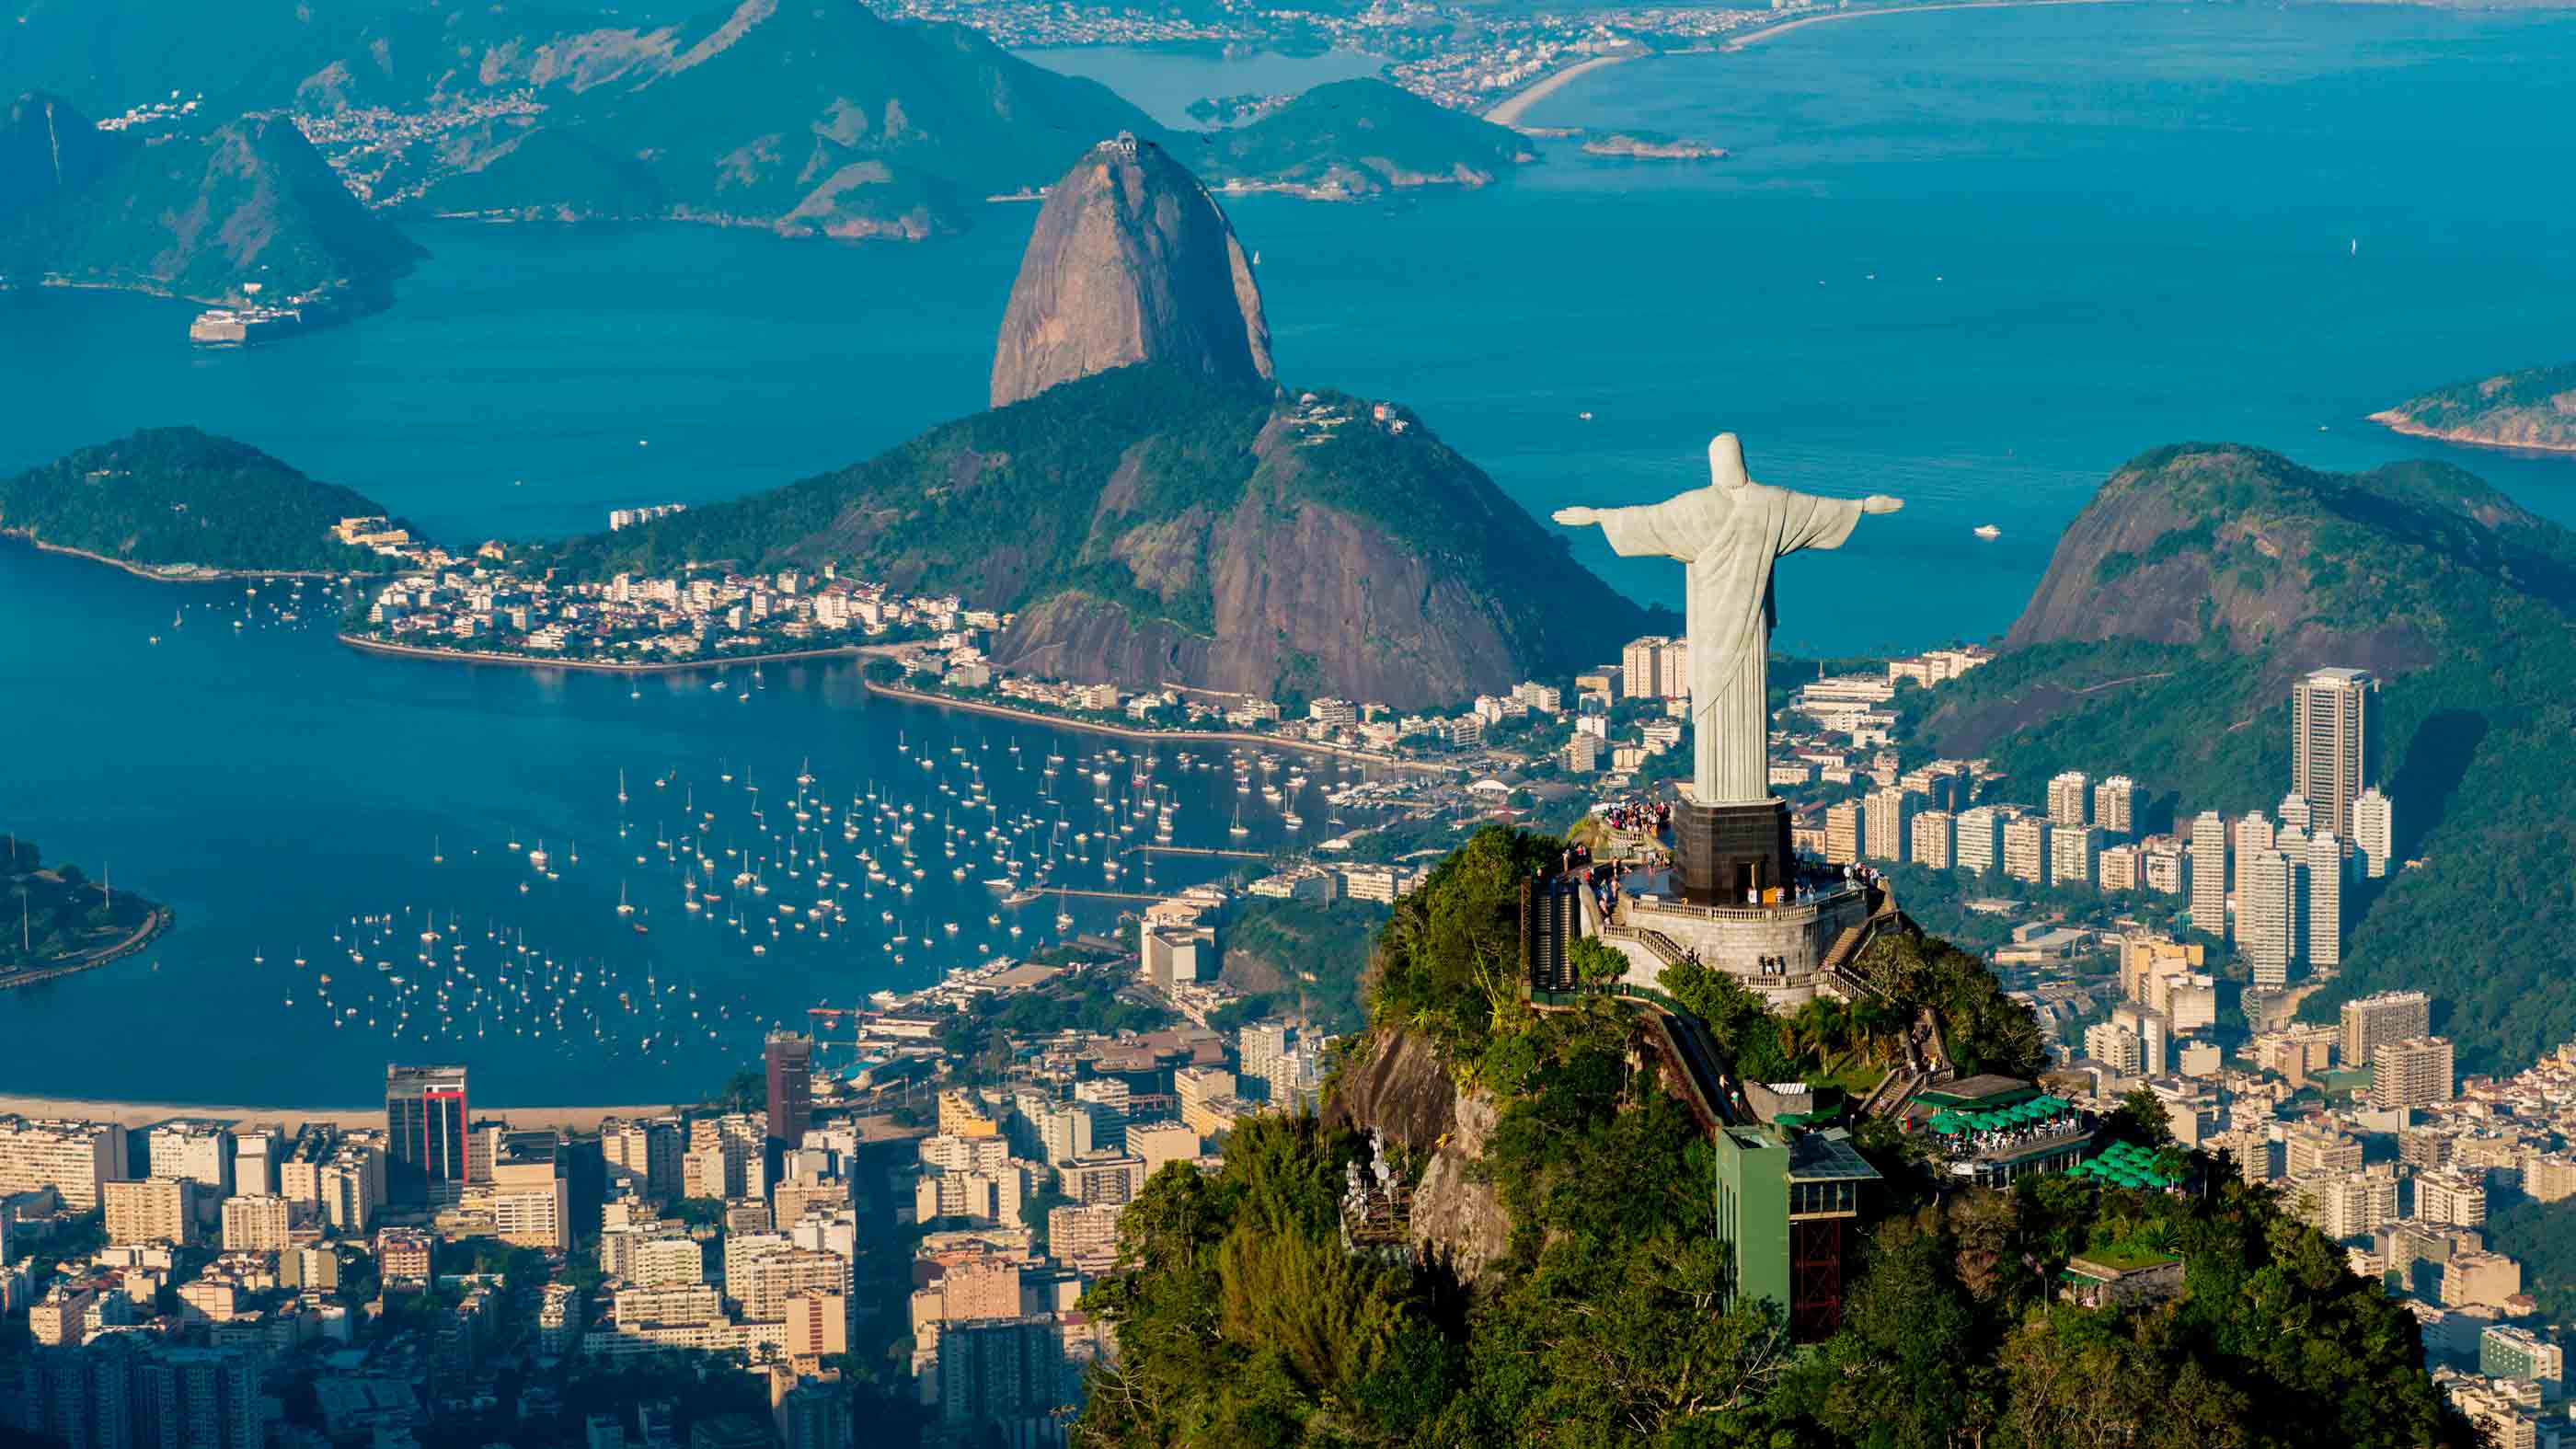 If You Get 14/17 on This Random Trivia Quiz, Then It’s Official: You Are Extremely Knowledgeable Rio de Janeiro, Brazil